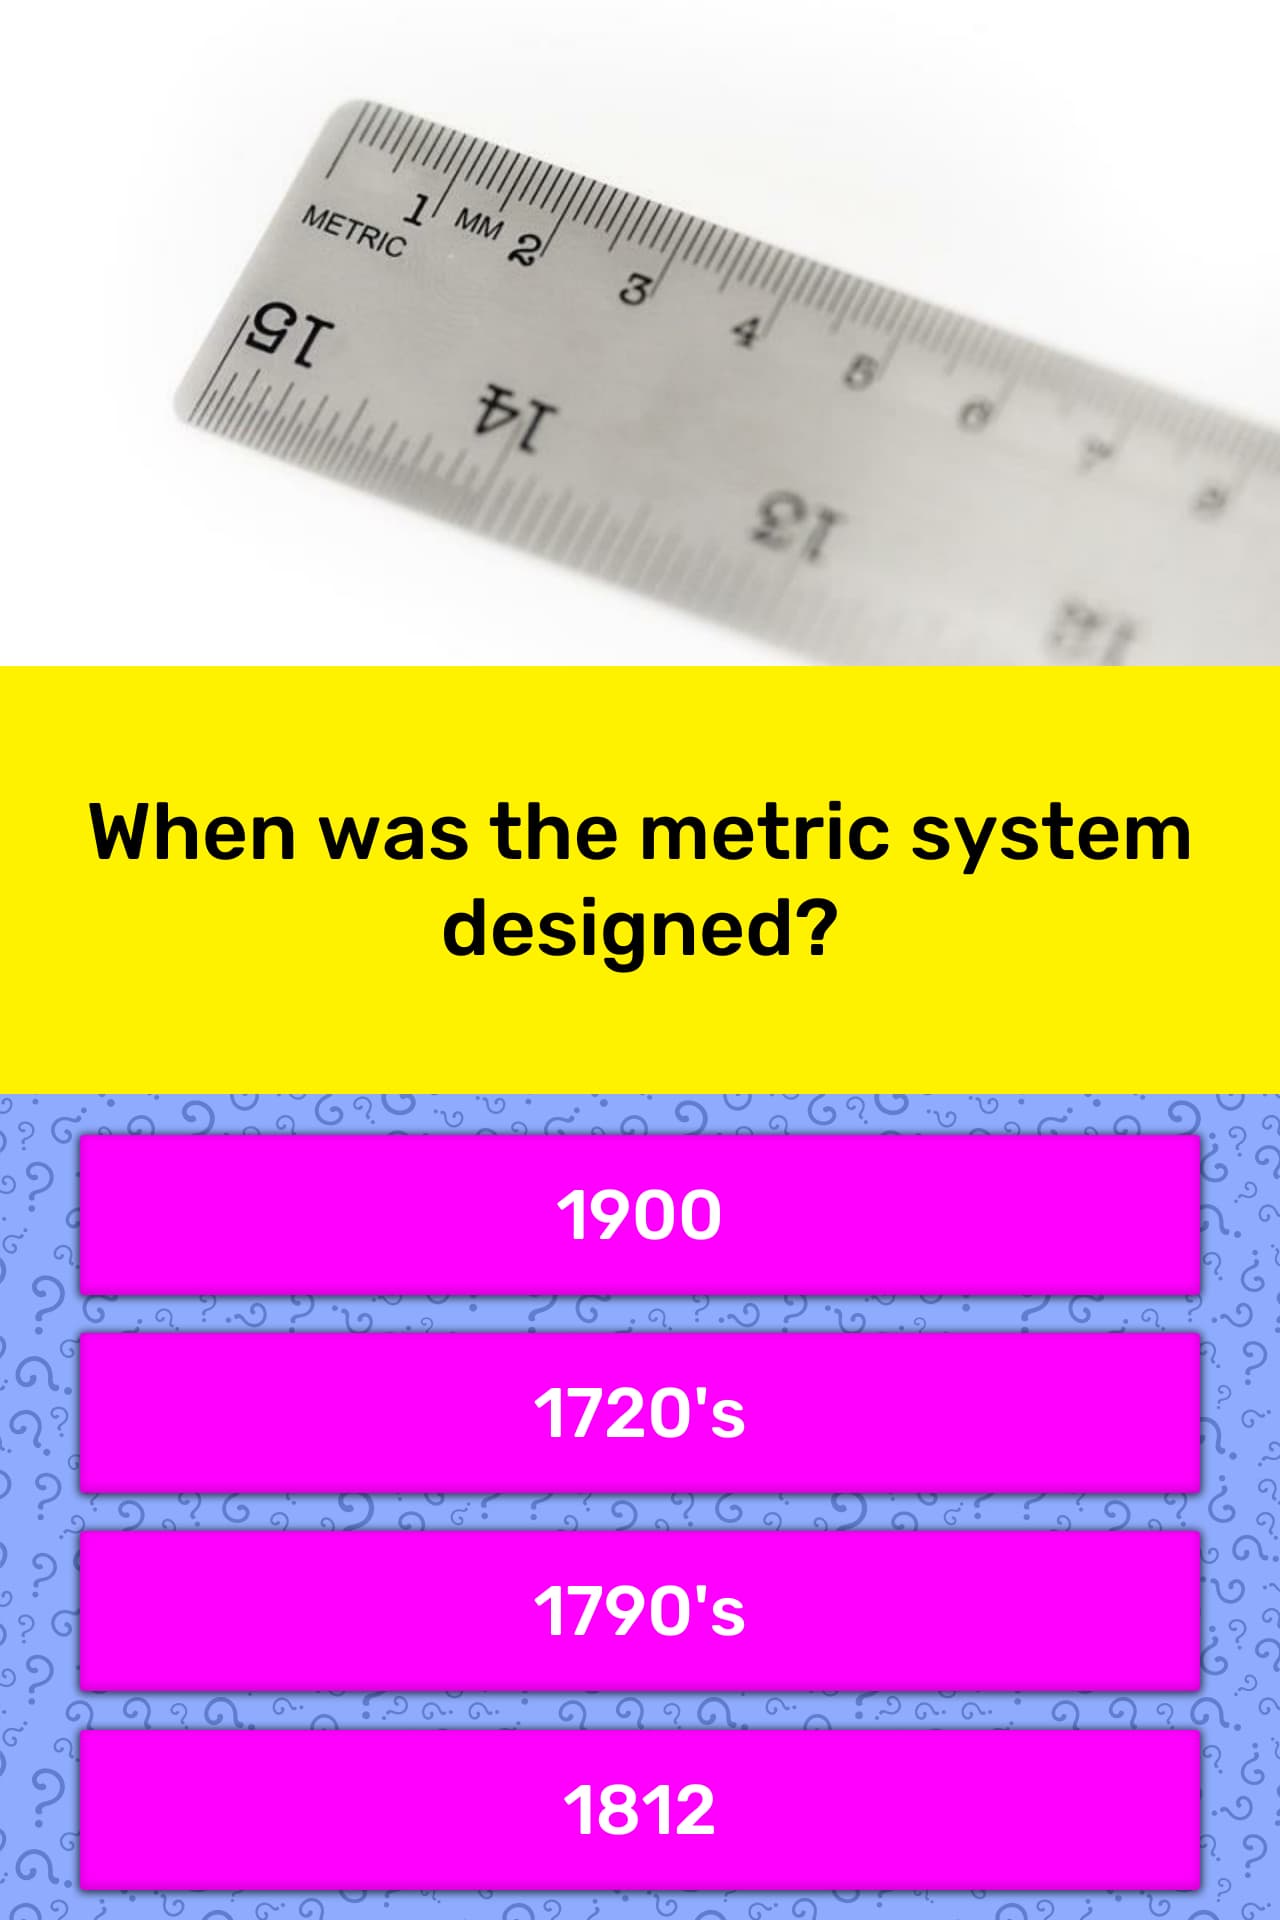 when-was-the-metric-system-designed-trivia-questions-quizzclub